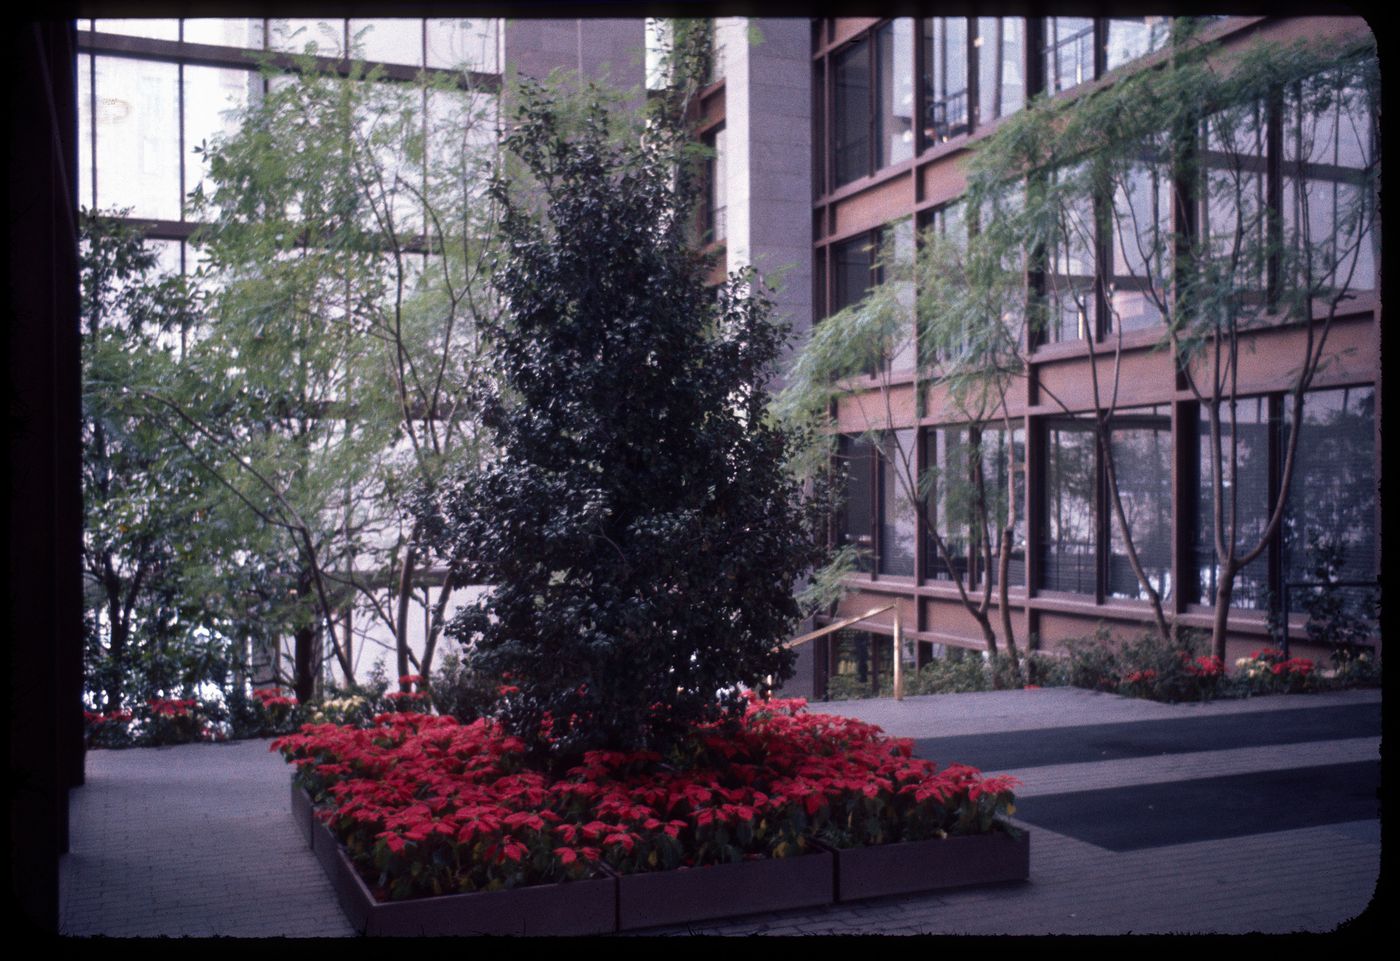 Garden atrium of the Ford Foundation in New York, precedent for the Bank of Canada design